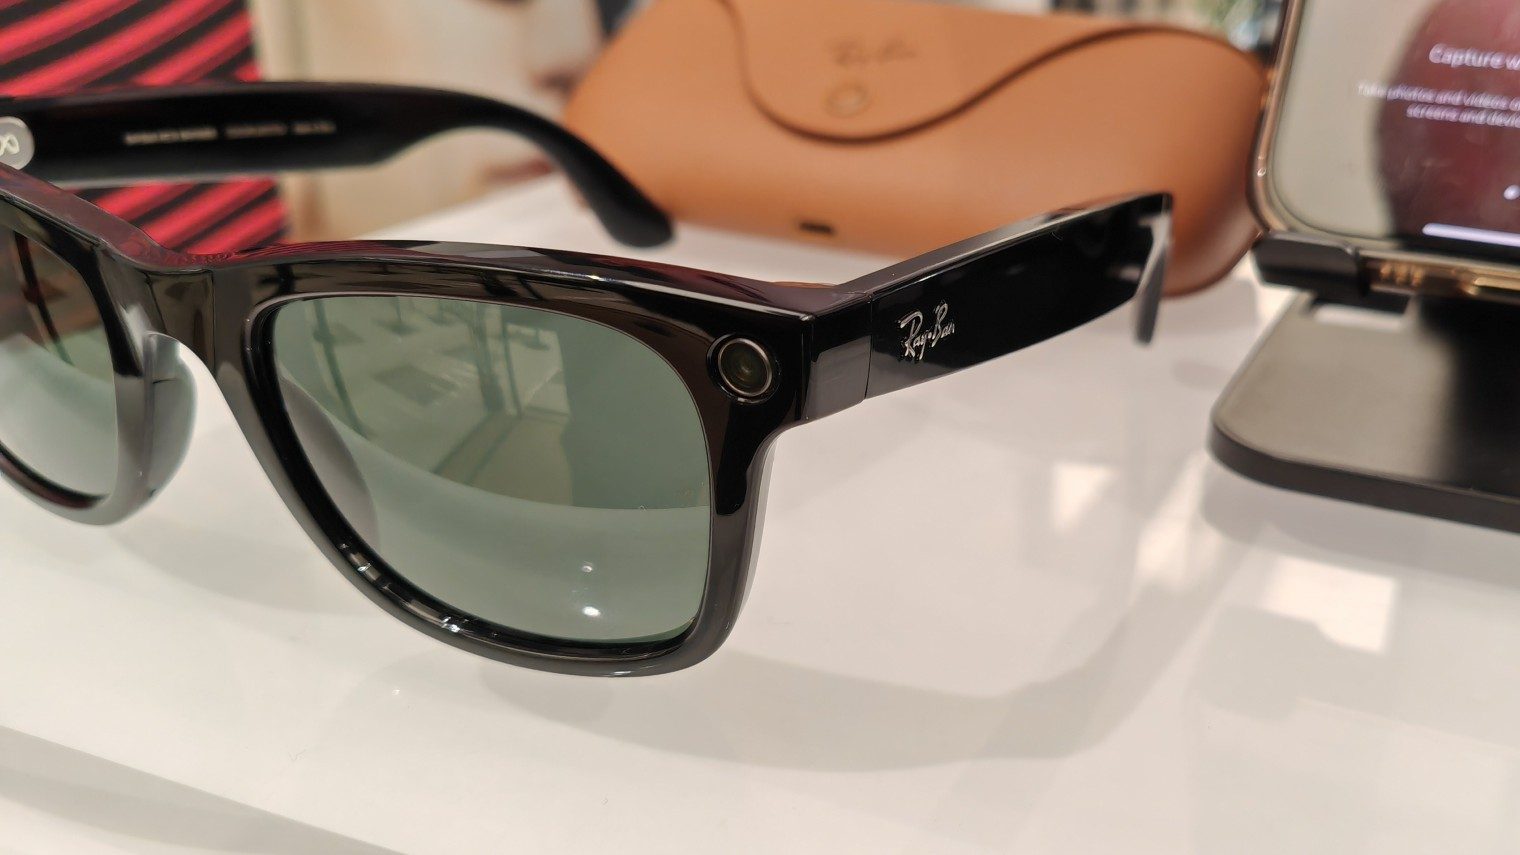 Distributor clarifies Ray-Ban Meta Smart Glasses not in the Philippines yet